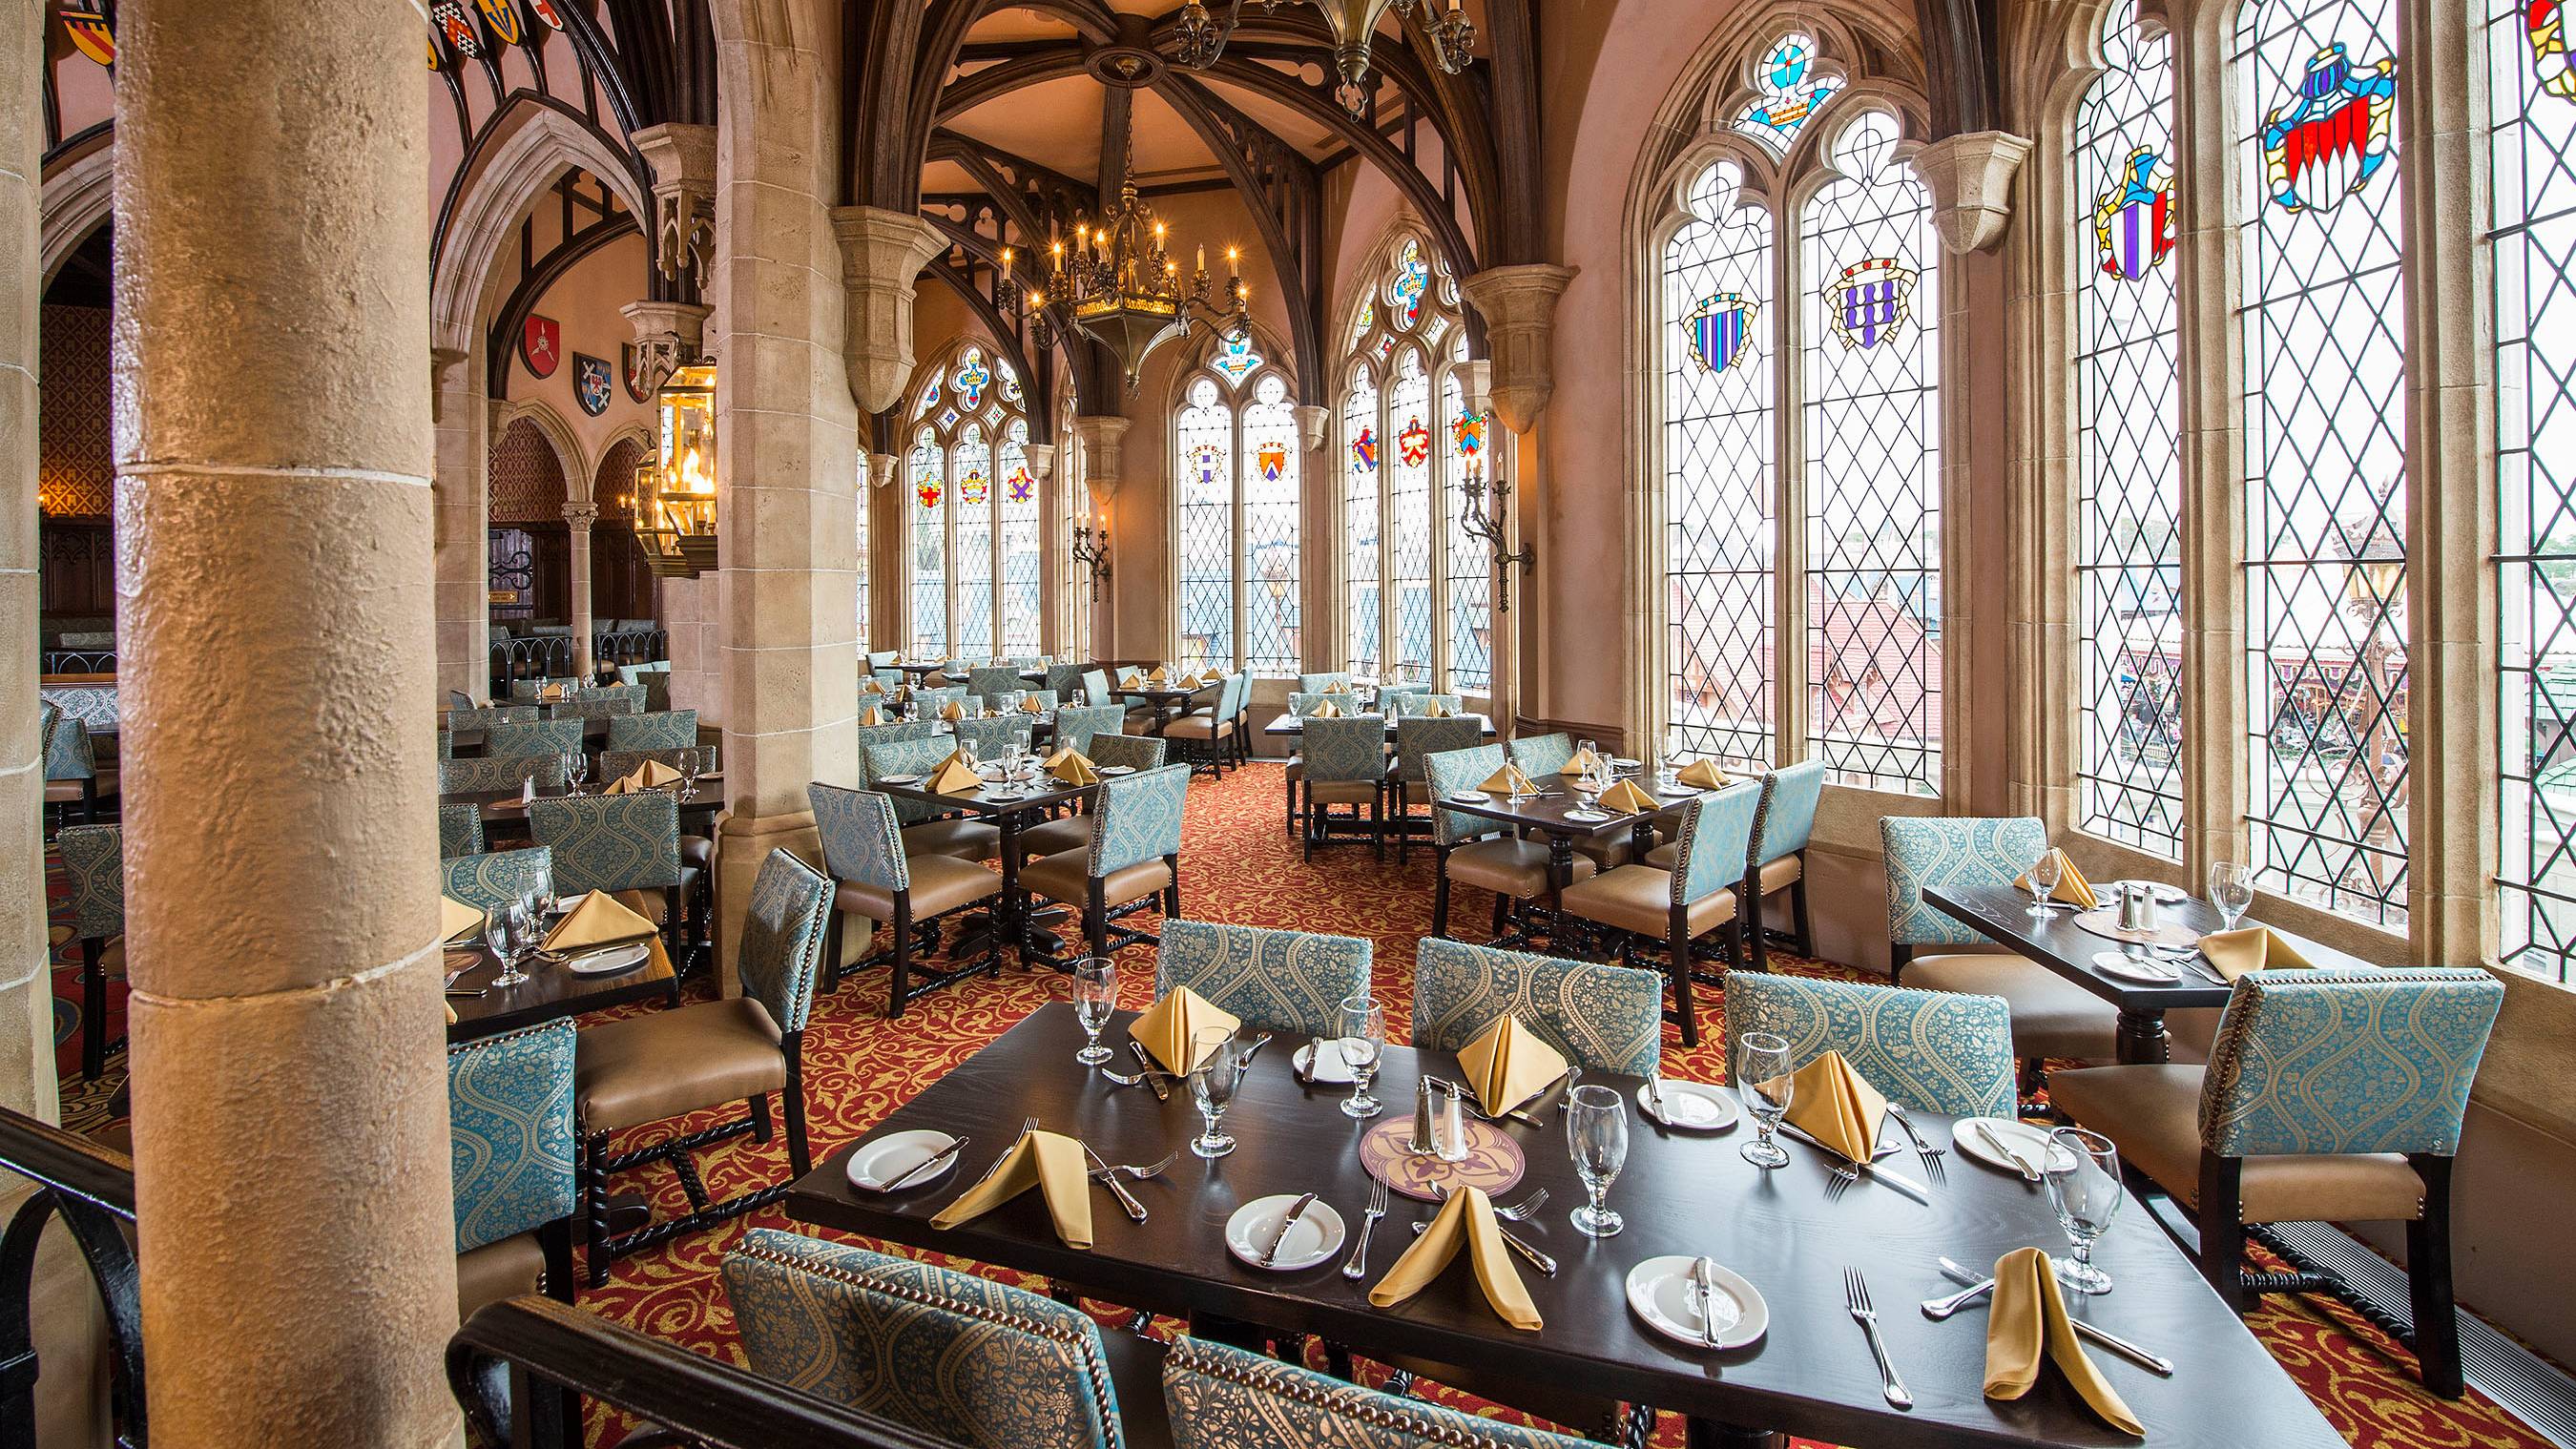 Cinderella's Royal Table closing for lengthy refurbishment in early 2015